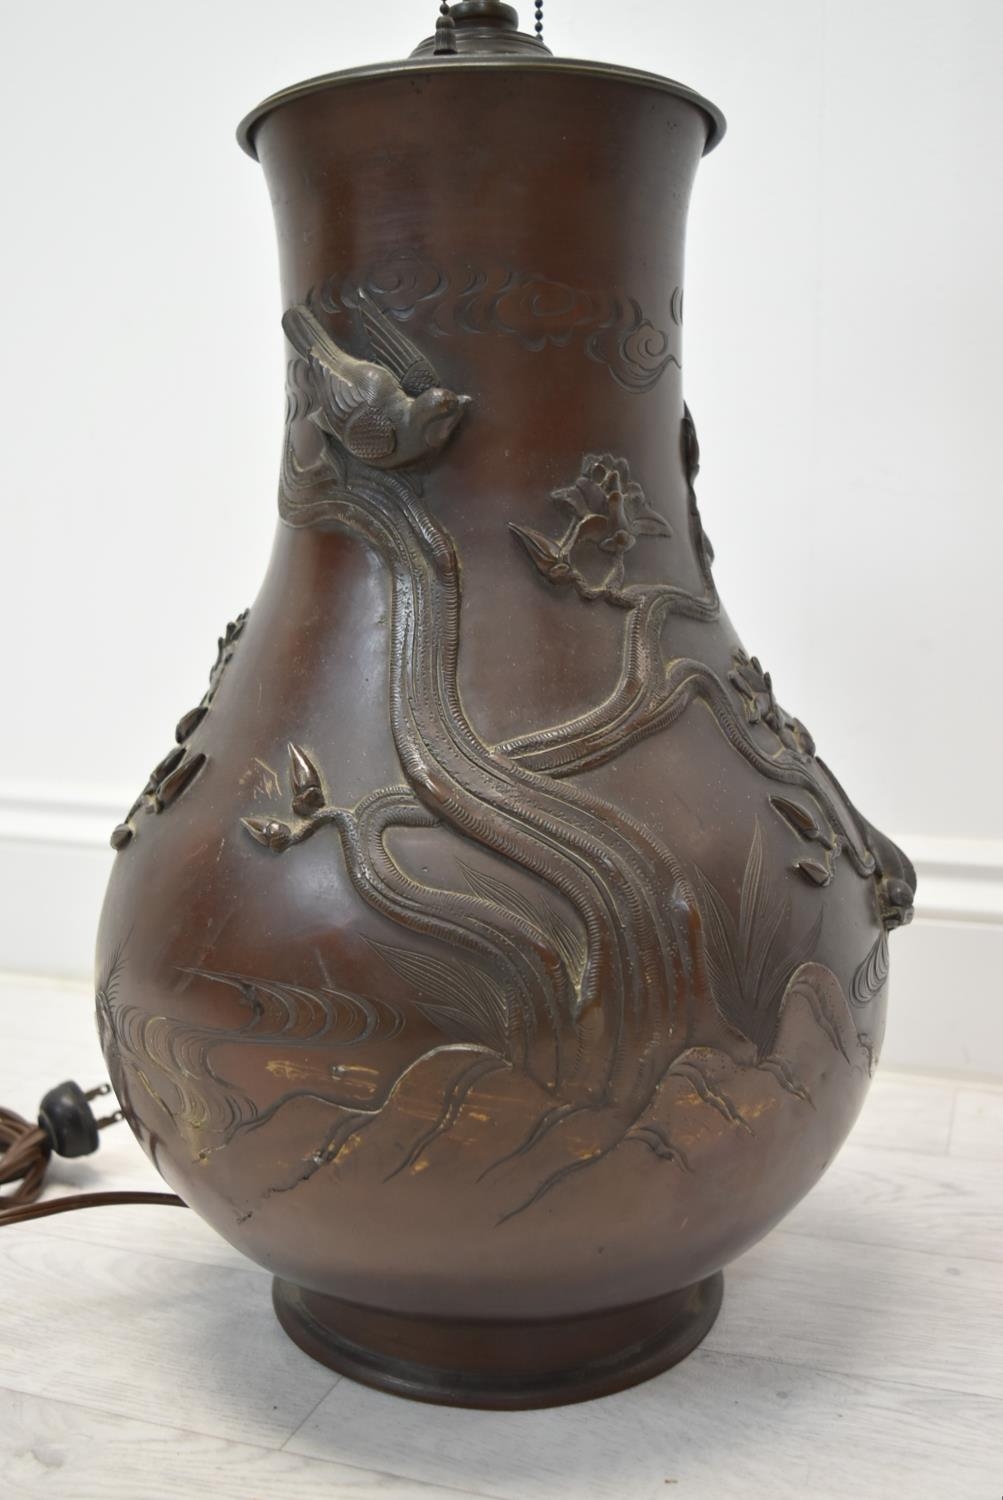 A Japanese Meiji period (1852-1912) bronze baluster vase cast with bird decoration (converted to a - Image 5 of 8